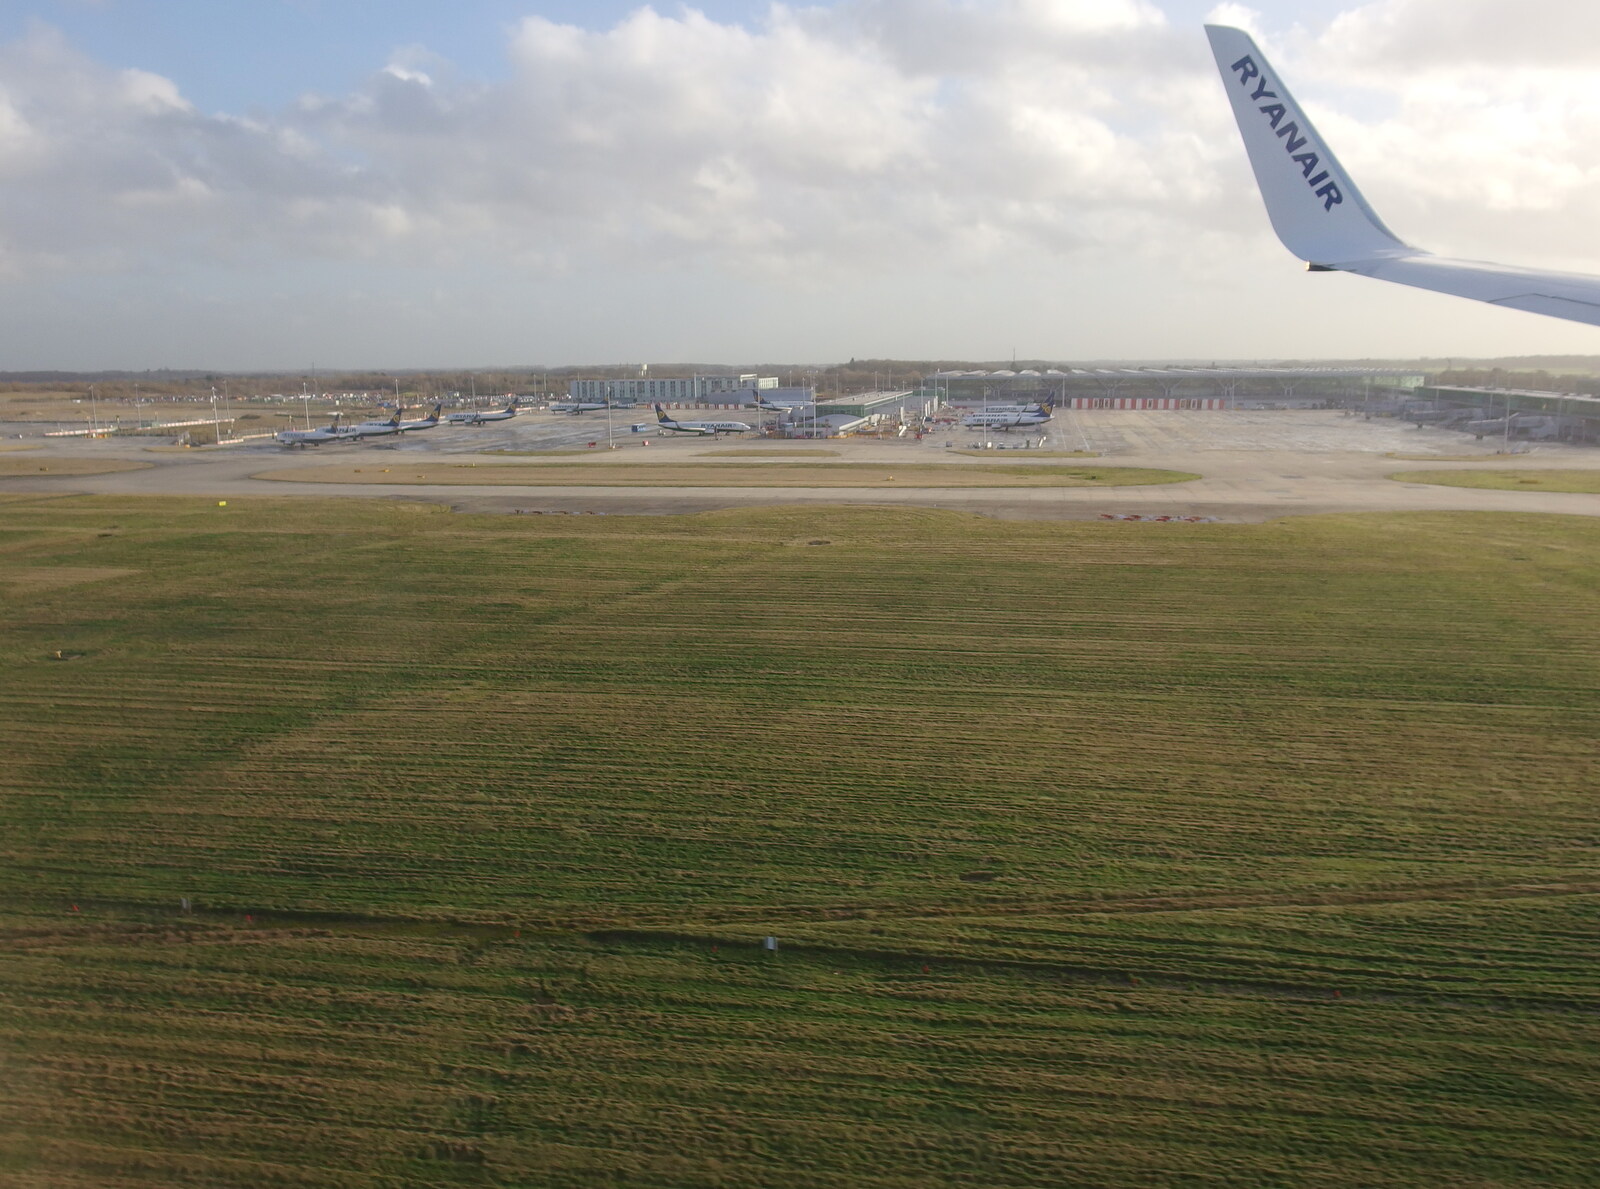 Stansted Airport from Dun Laoghaire and an Electrical Disaster, Monkstown, County Dublin, Ireland - 4th January 2014